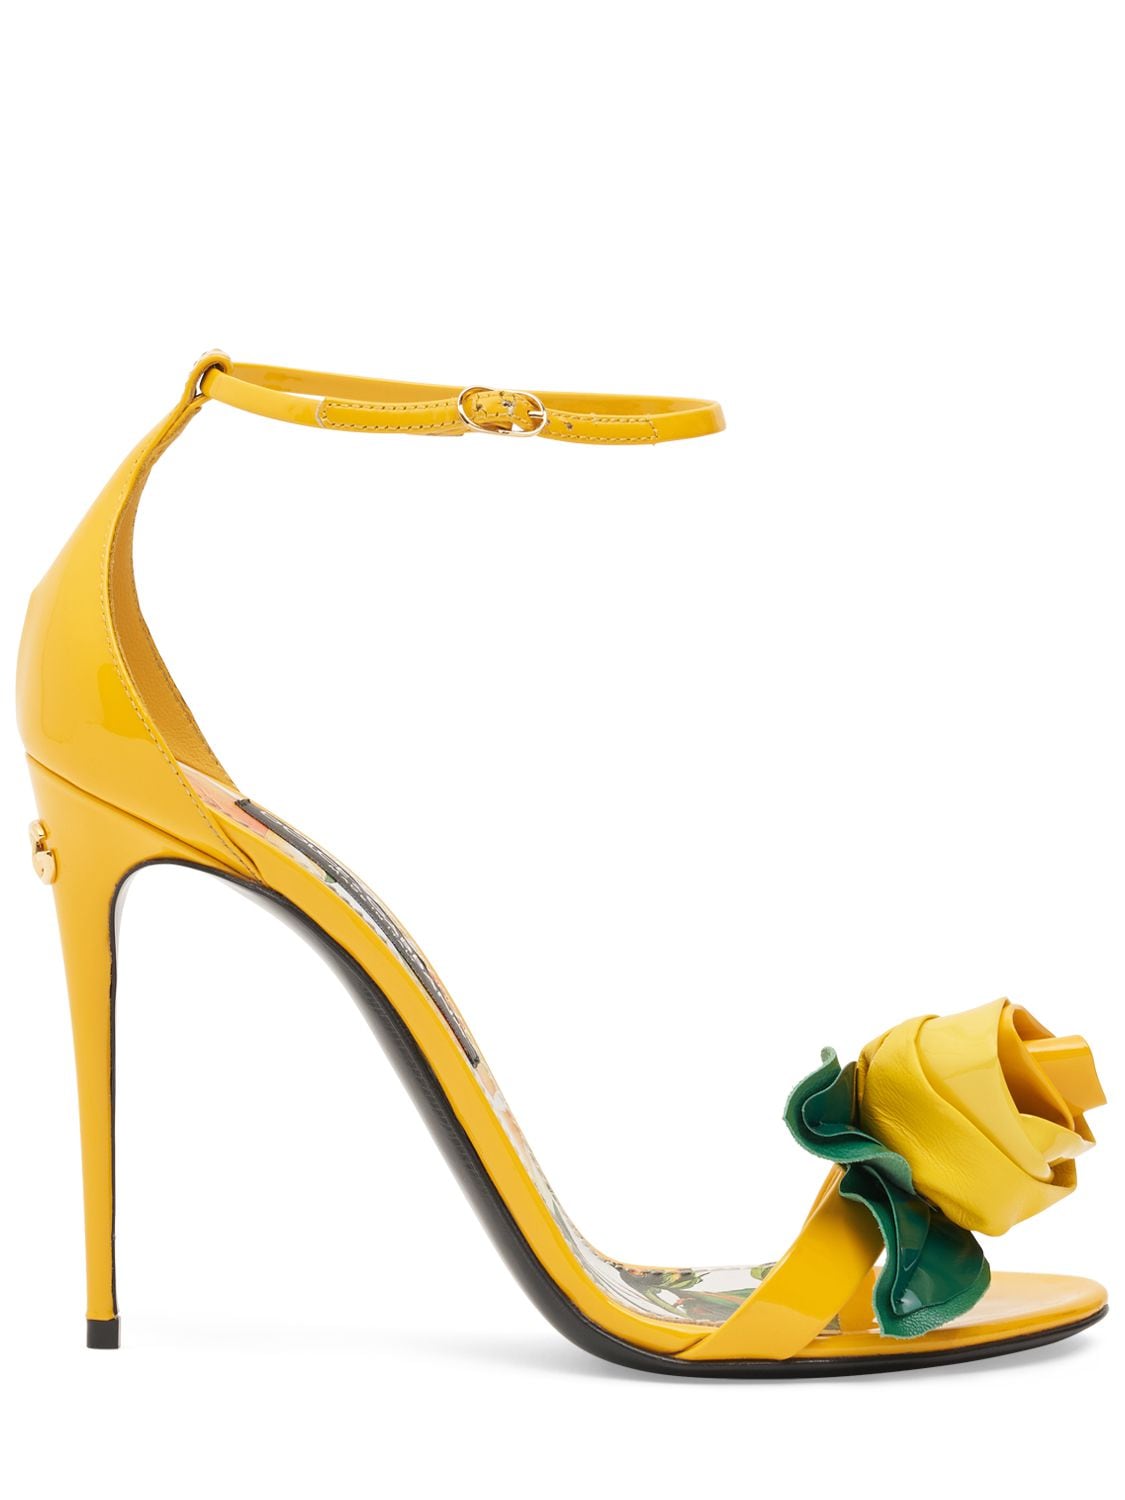 Dolce & Gabbana 105mm Keira Patent Leather Sandals In Gelb